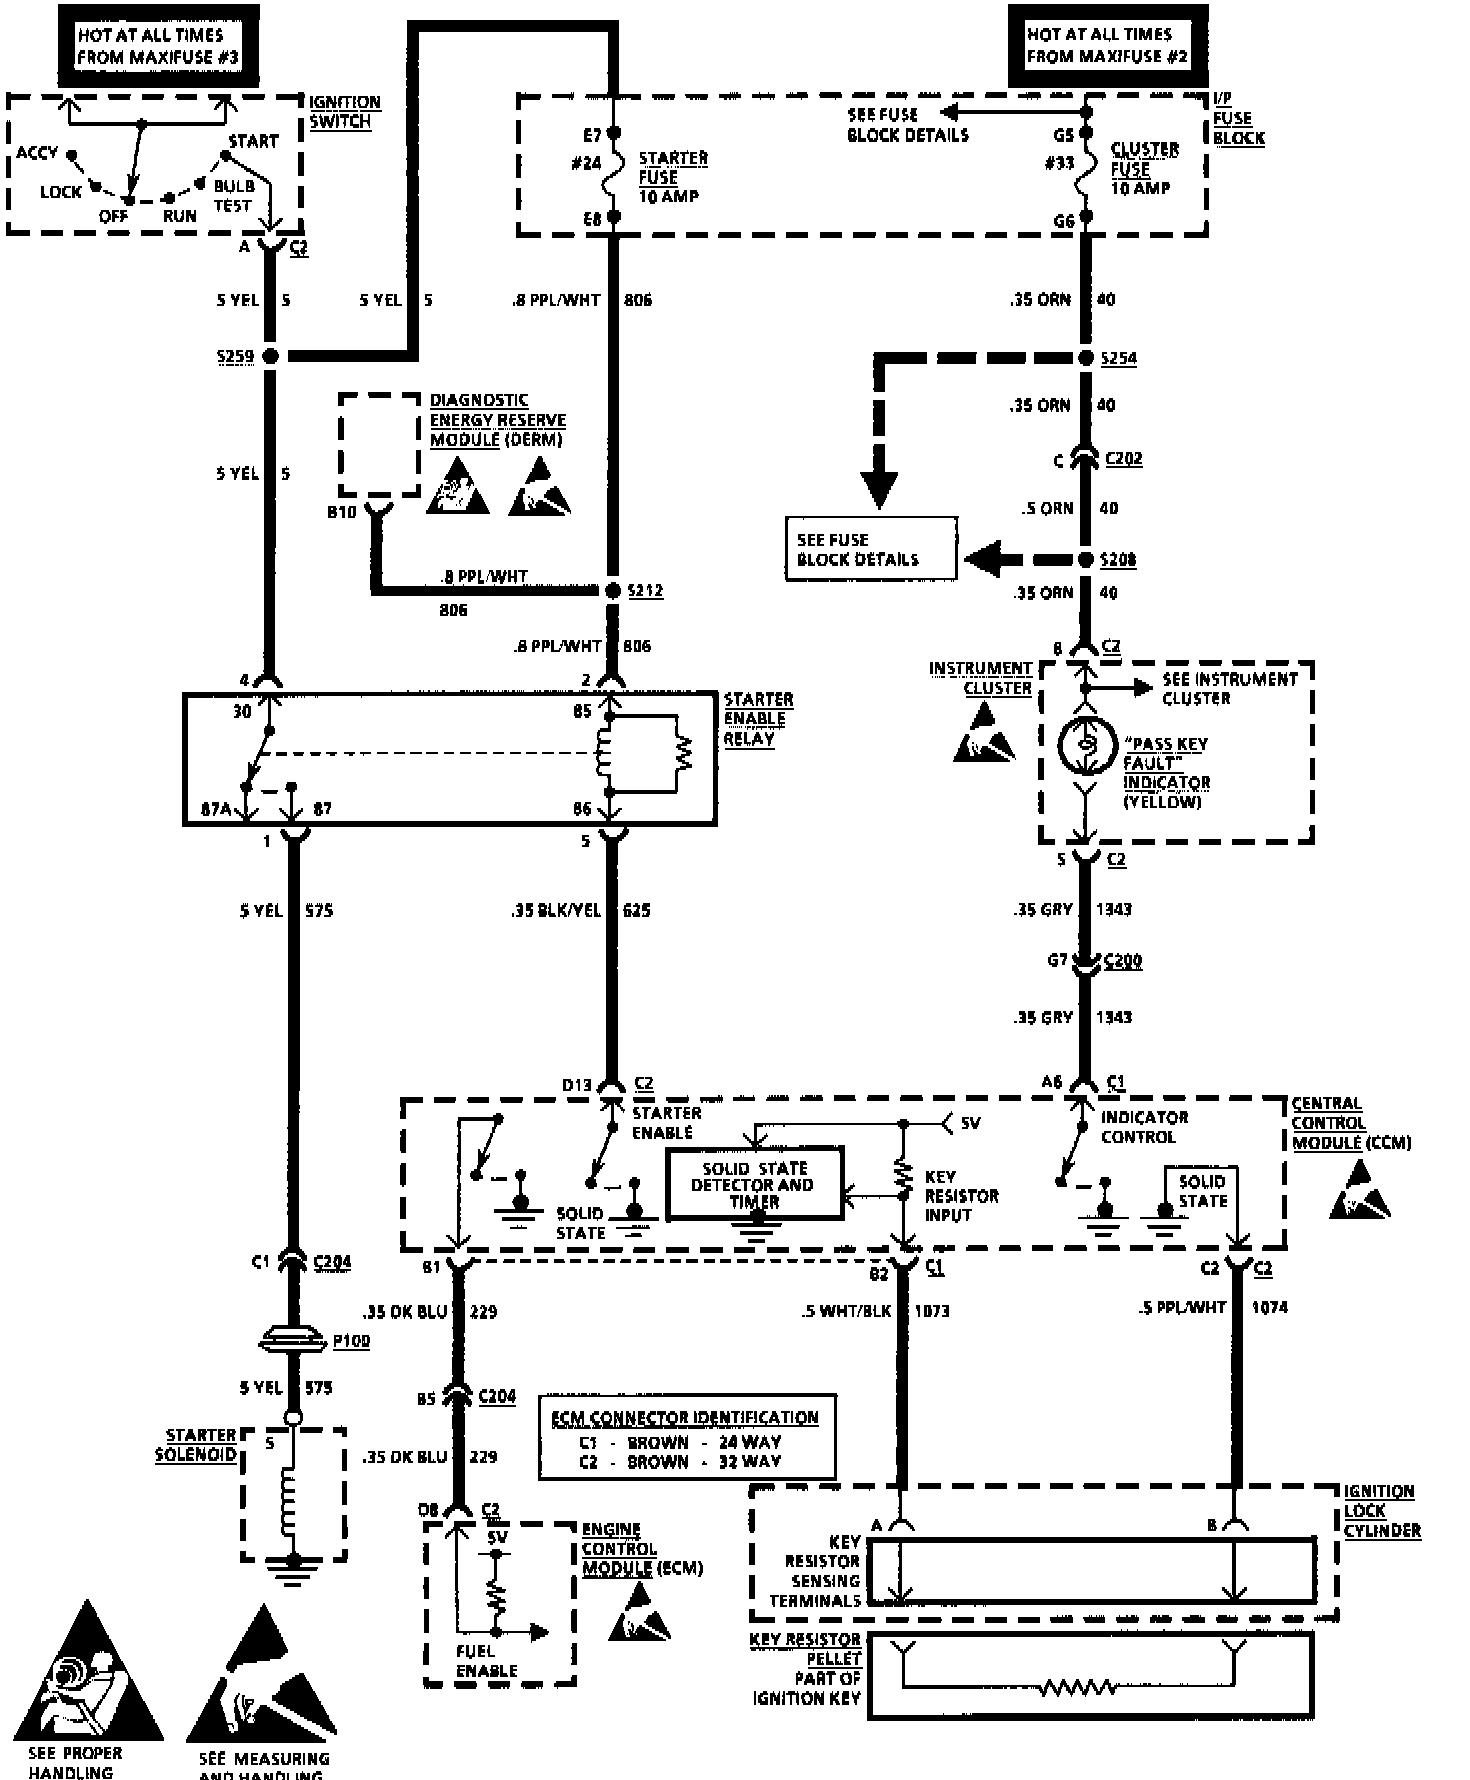 wiring diagram for cooling fan circuit on a 98 sls